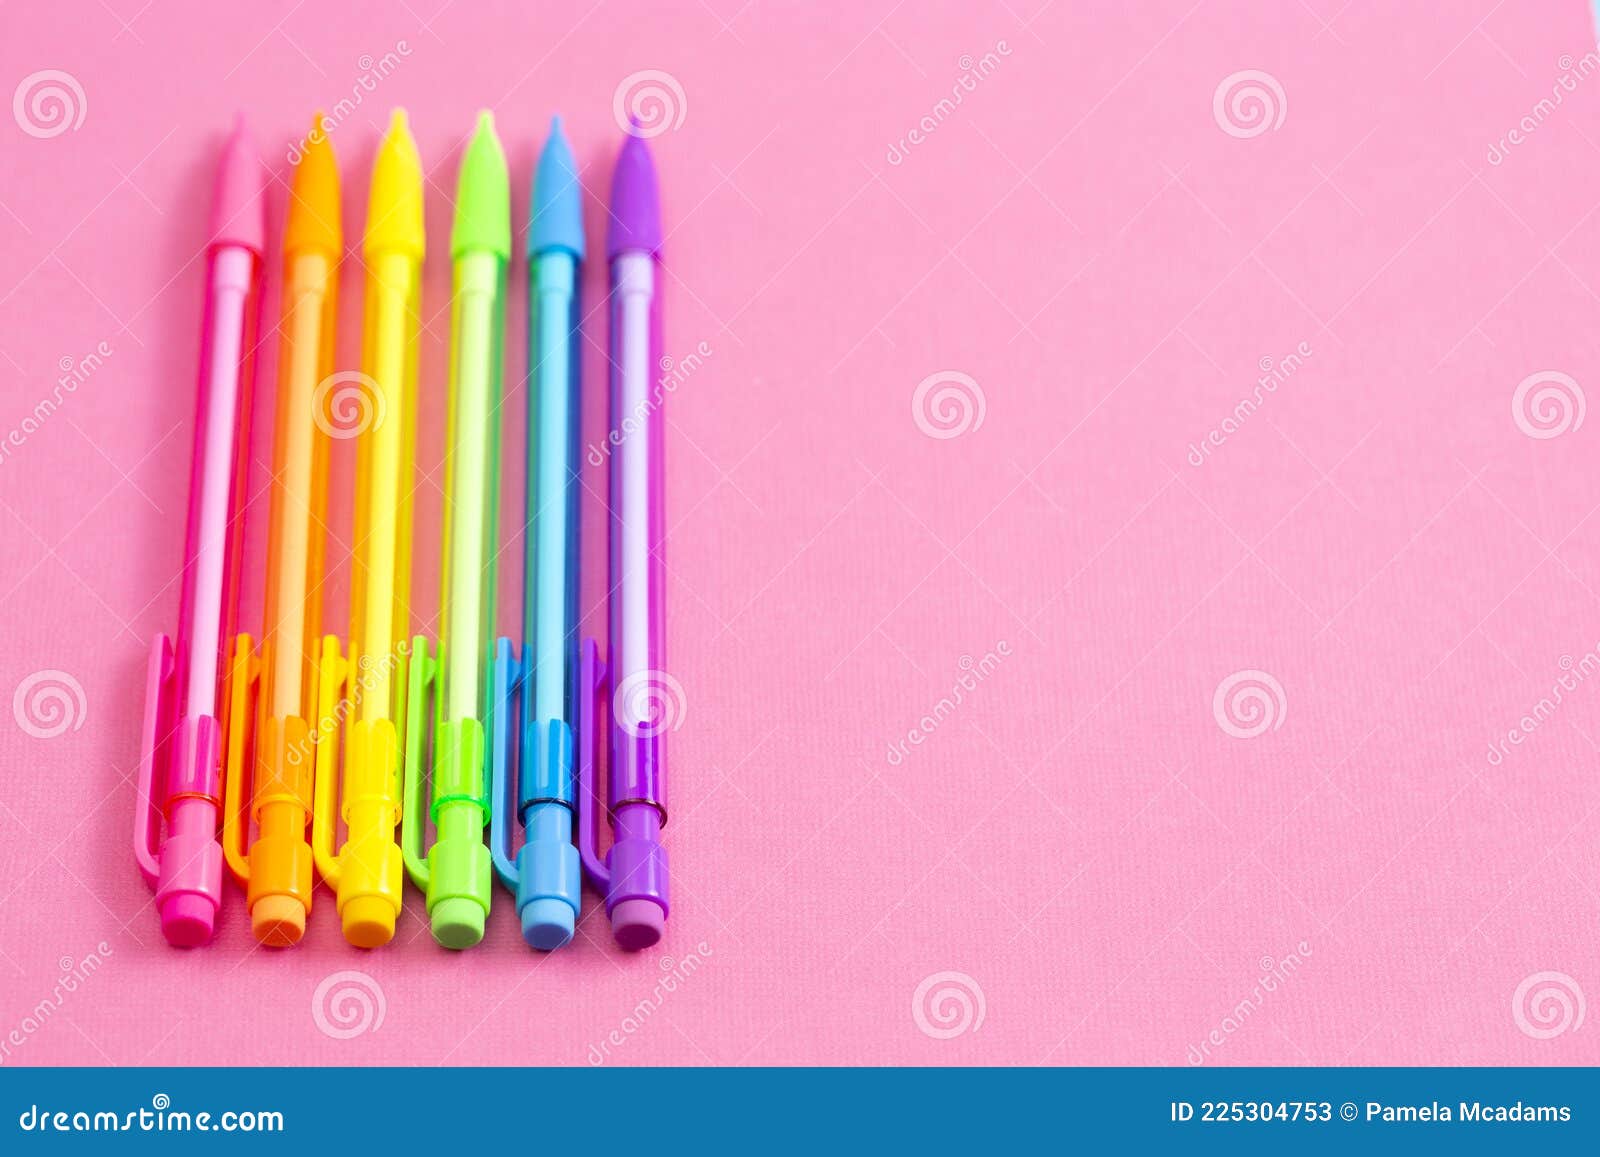 Background with Rainbow Mechanical Pencils on a Bright Pink Table Great ...